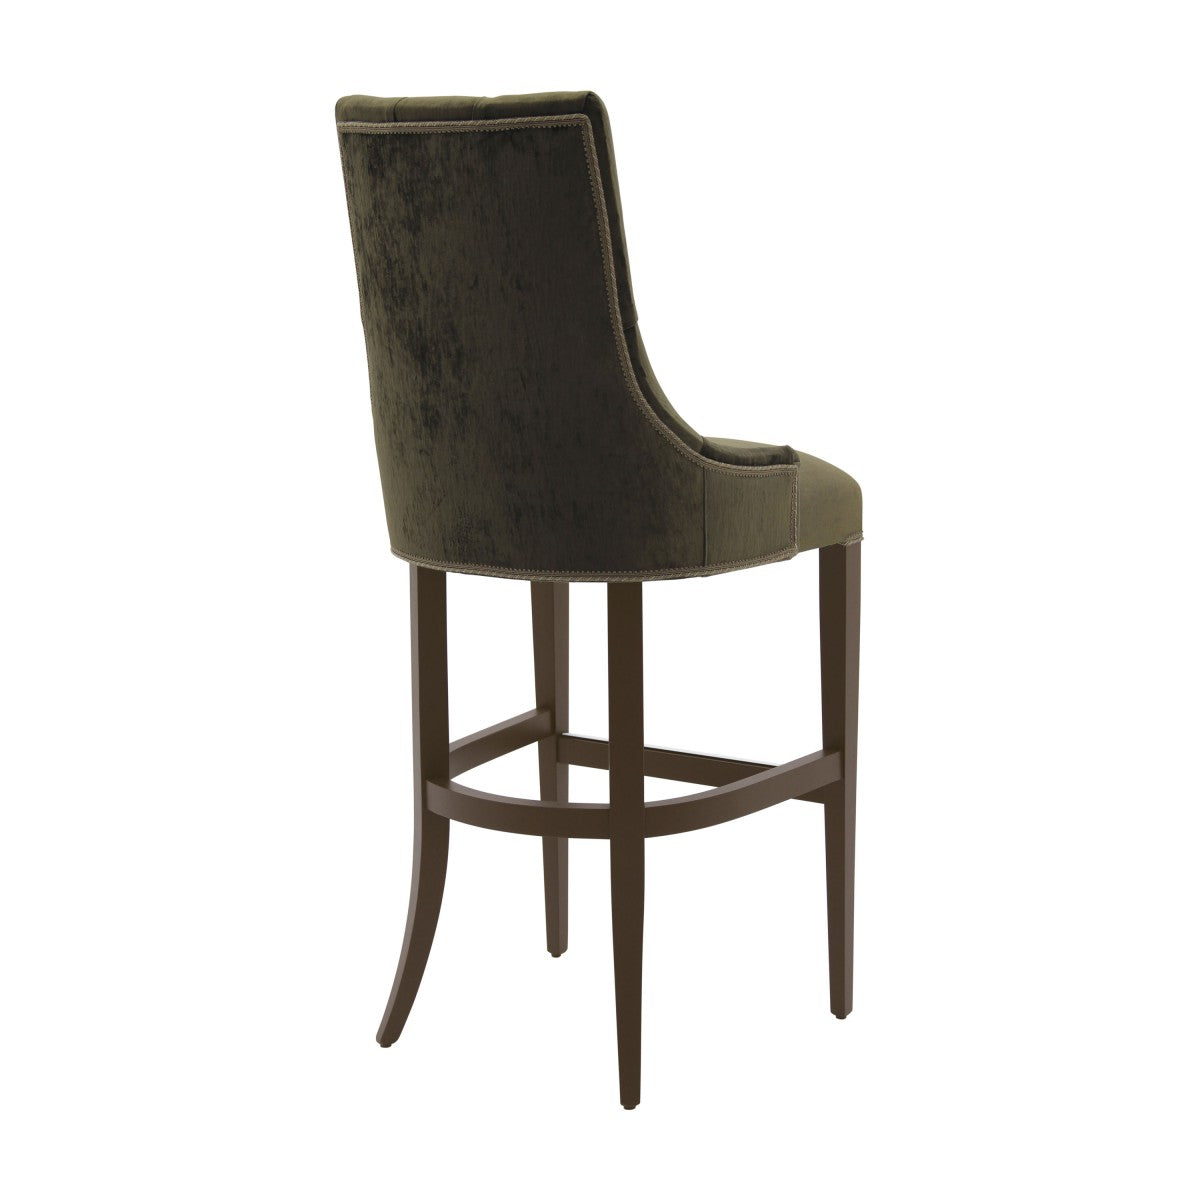 Olympia Bespoke Upholstered Contemporary Kitchen Barstool MS410B Custom Made To Order